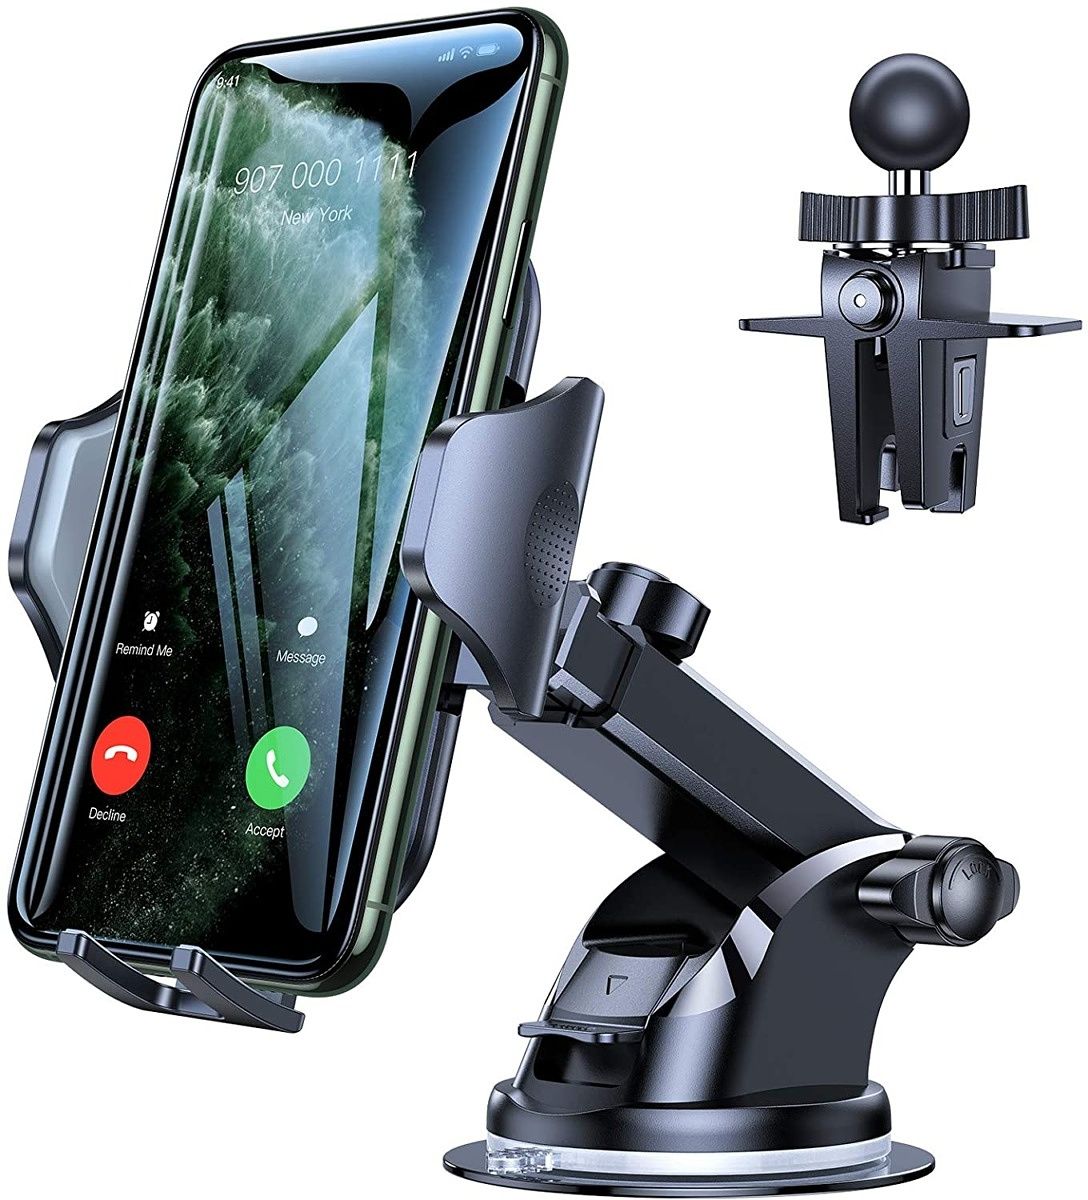 The Vicseed car mount, as you can see, is a suction-cup-based mount that can easily hold your smartphone in place while you drive. This particular phone mount is reasonably priced and it's suitable to hold both the regular Pixel 7 and the Pixel 7 Pro without any issues.